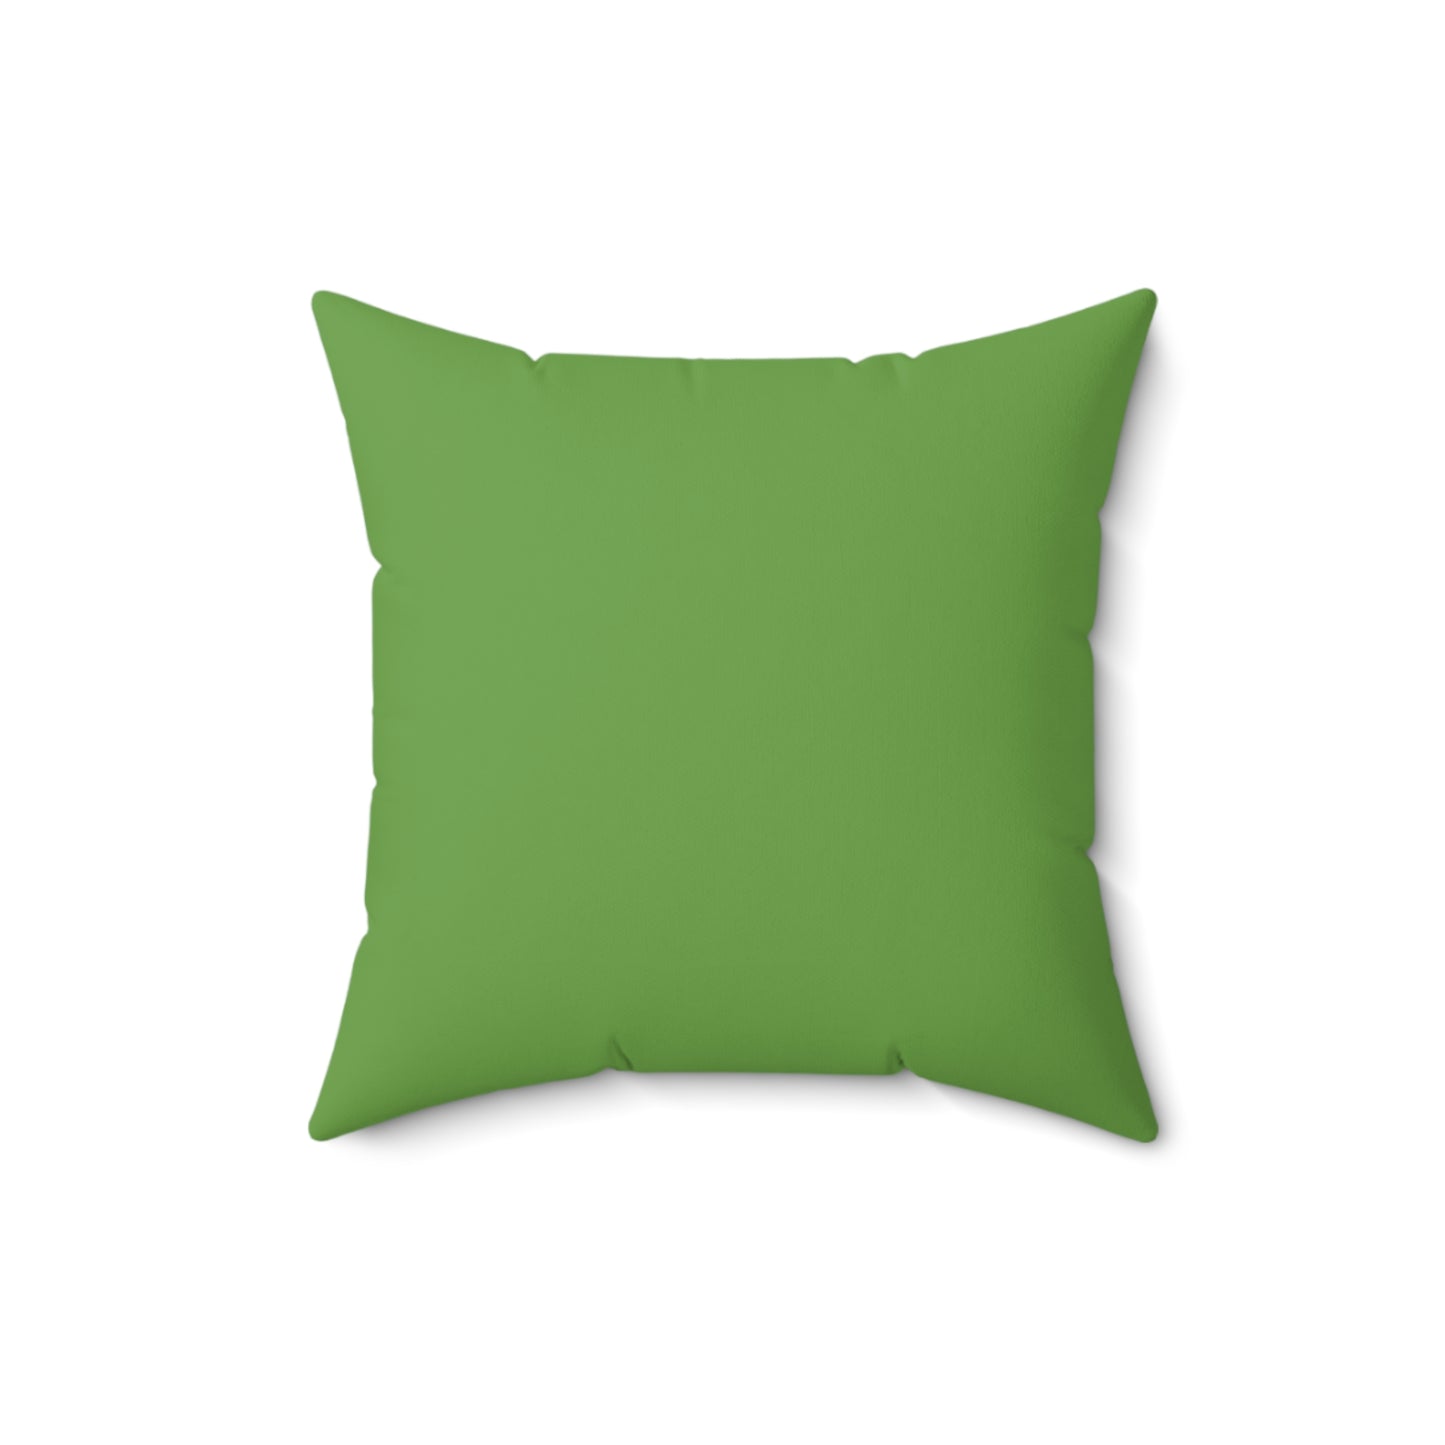 See Good in All Things Square Pillow